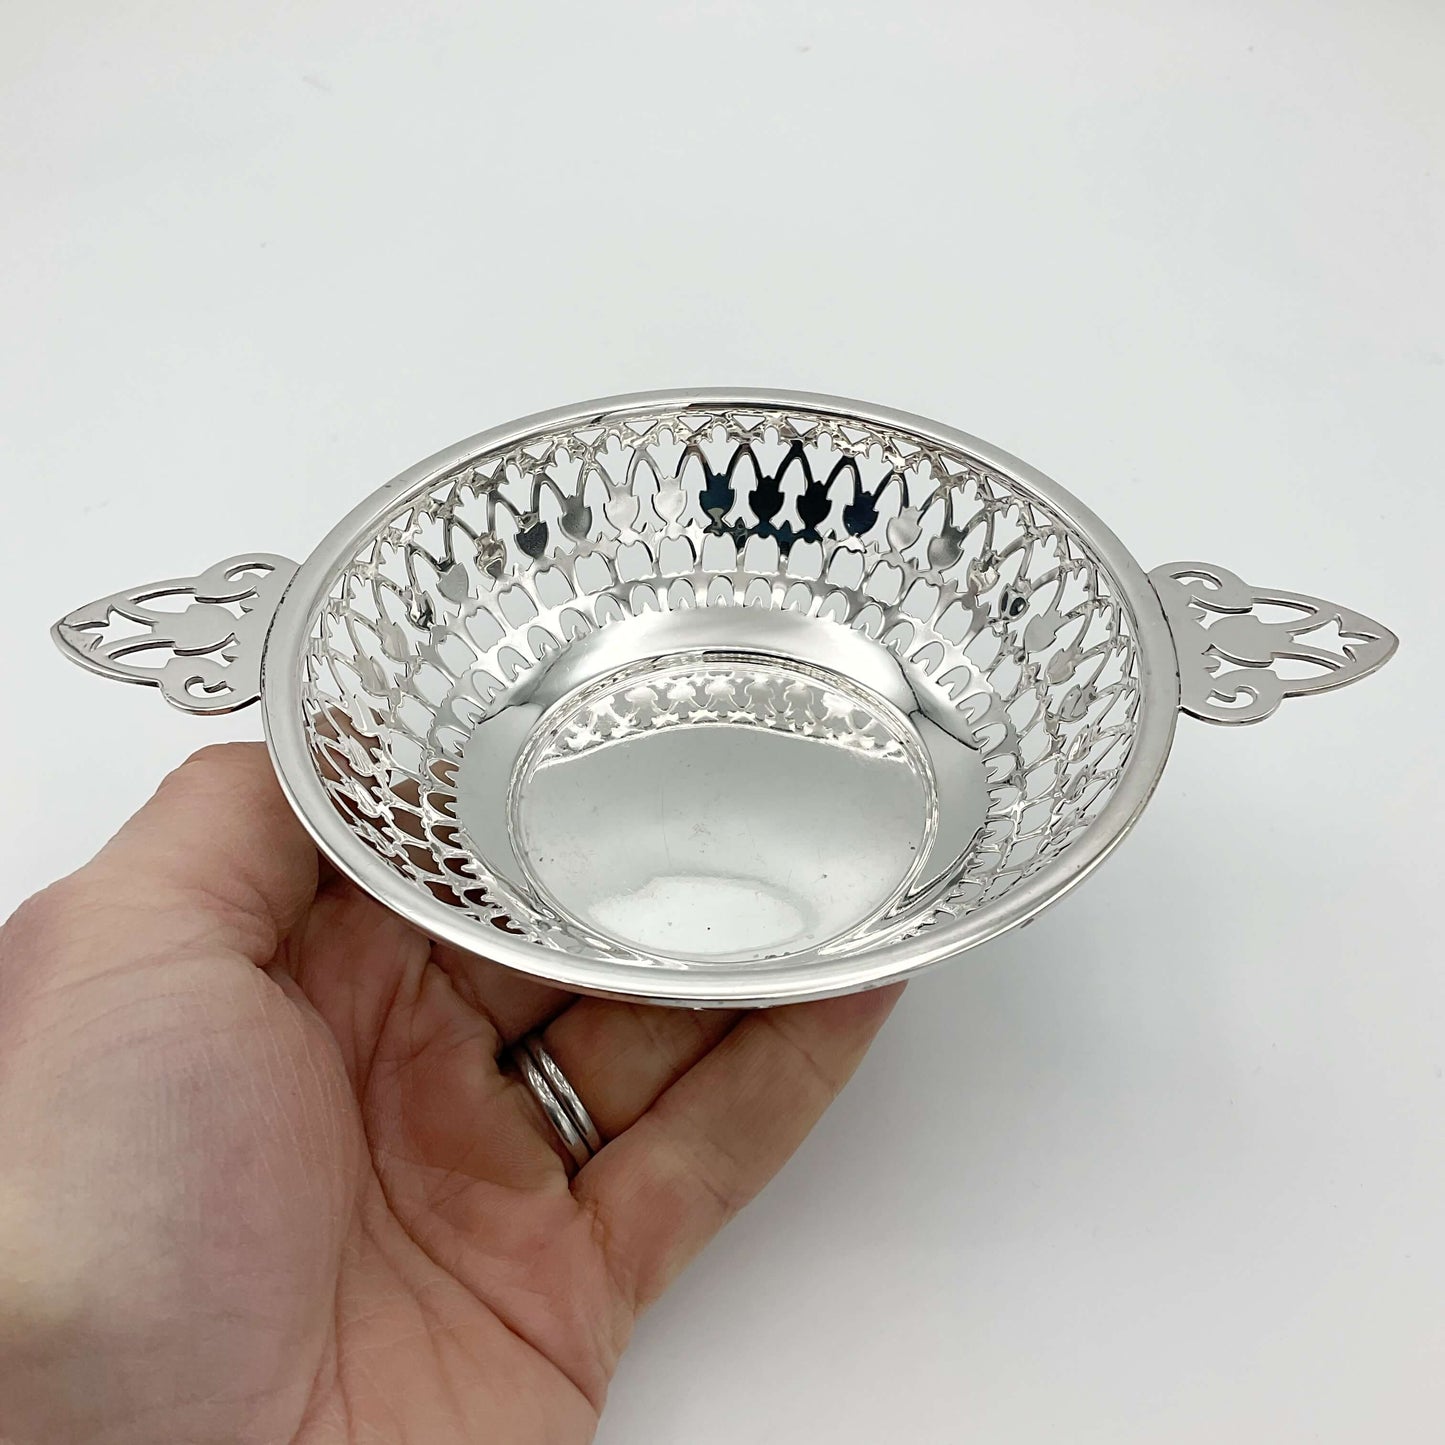 Shiny silver pierced bowl with handles sitting in a hand